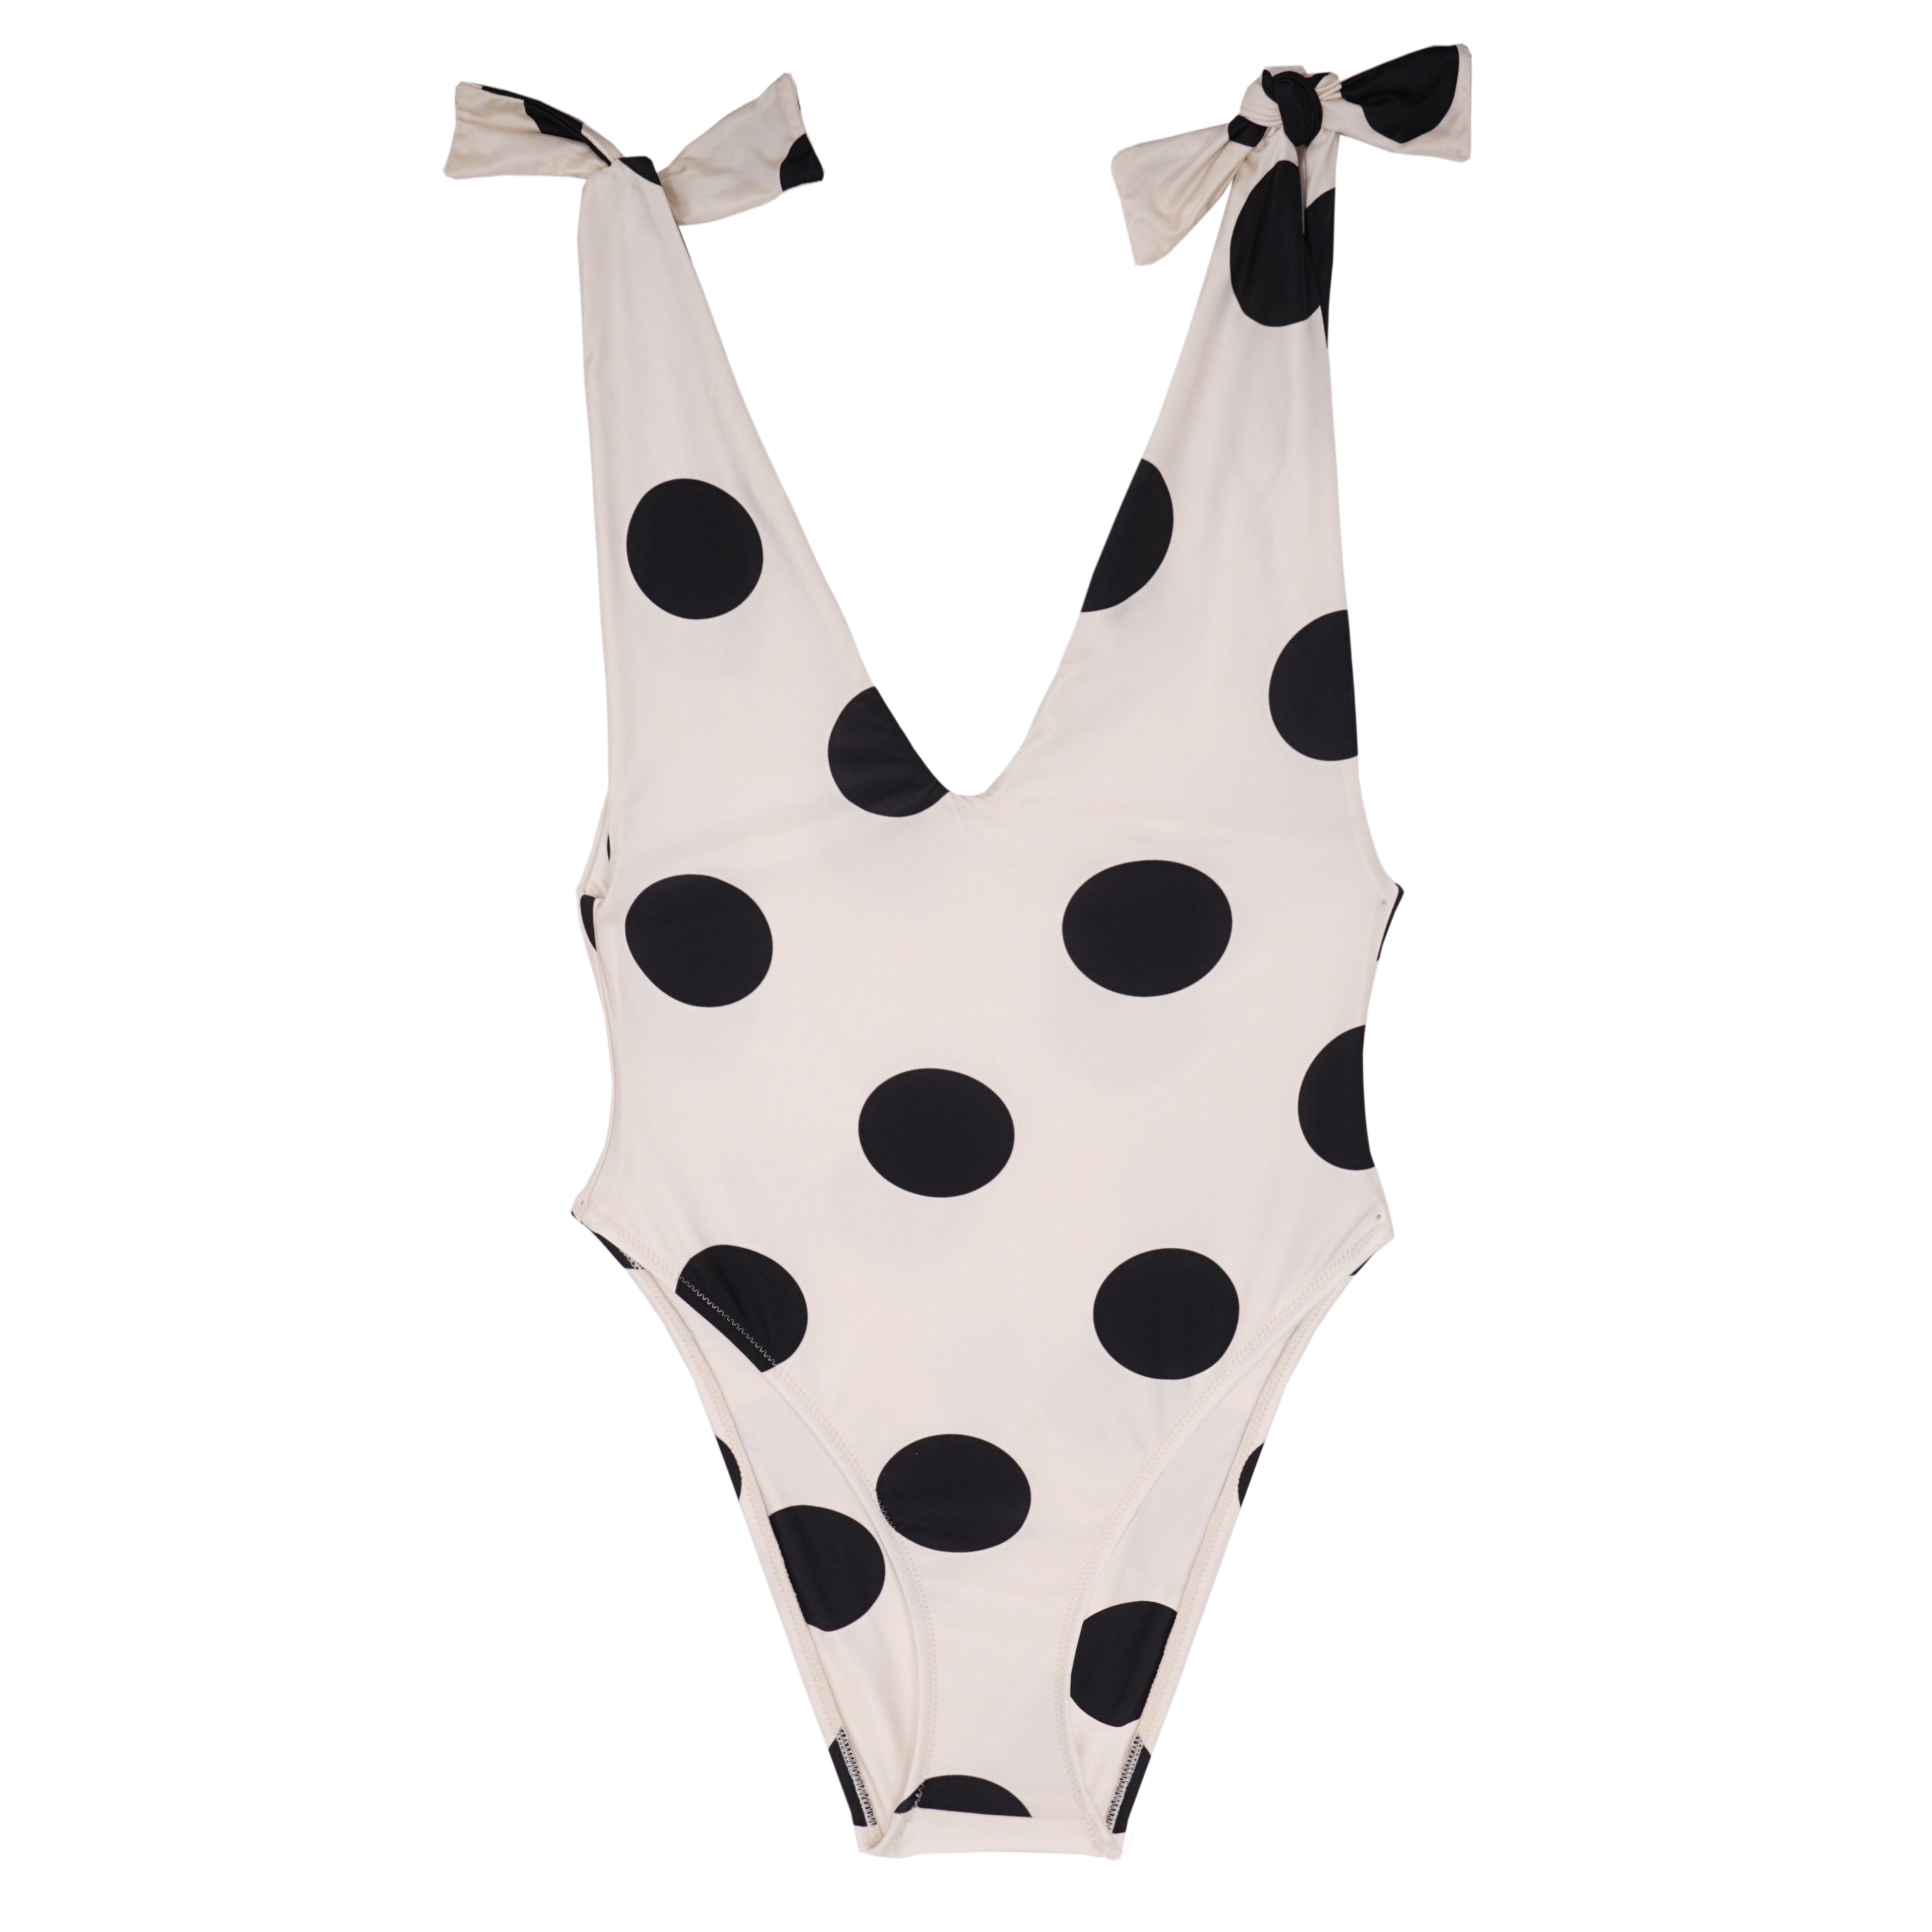 Anderson One Piece - Dotty – Sidway